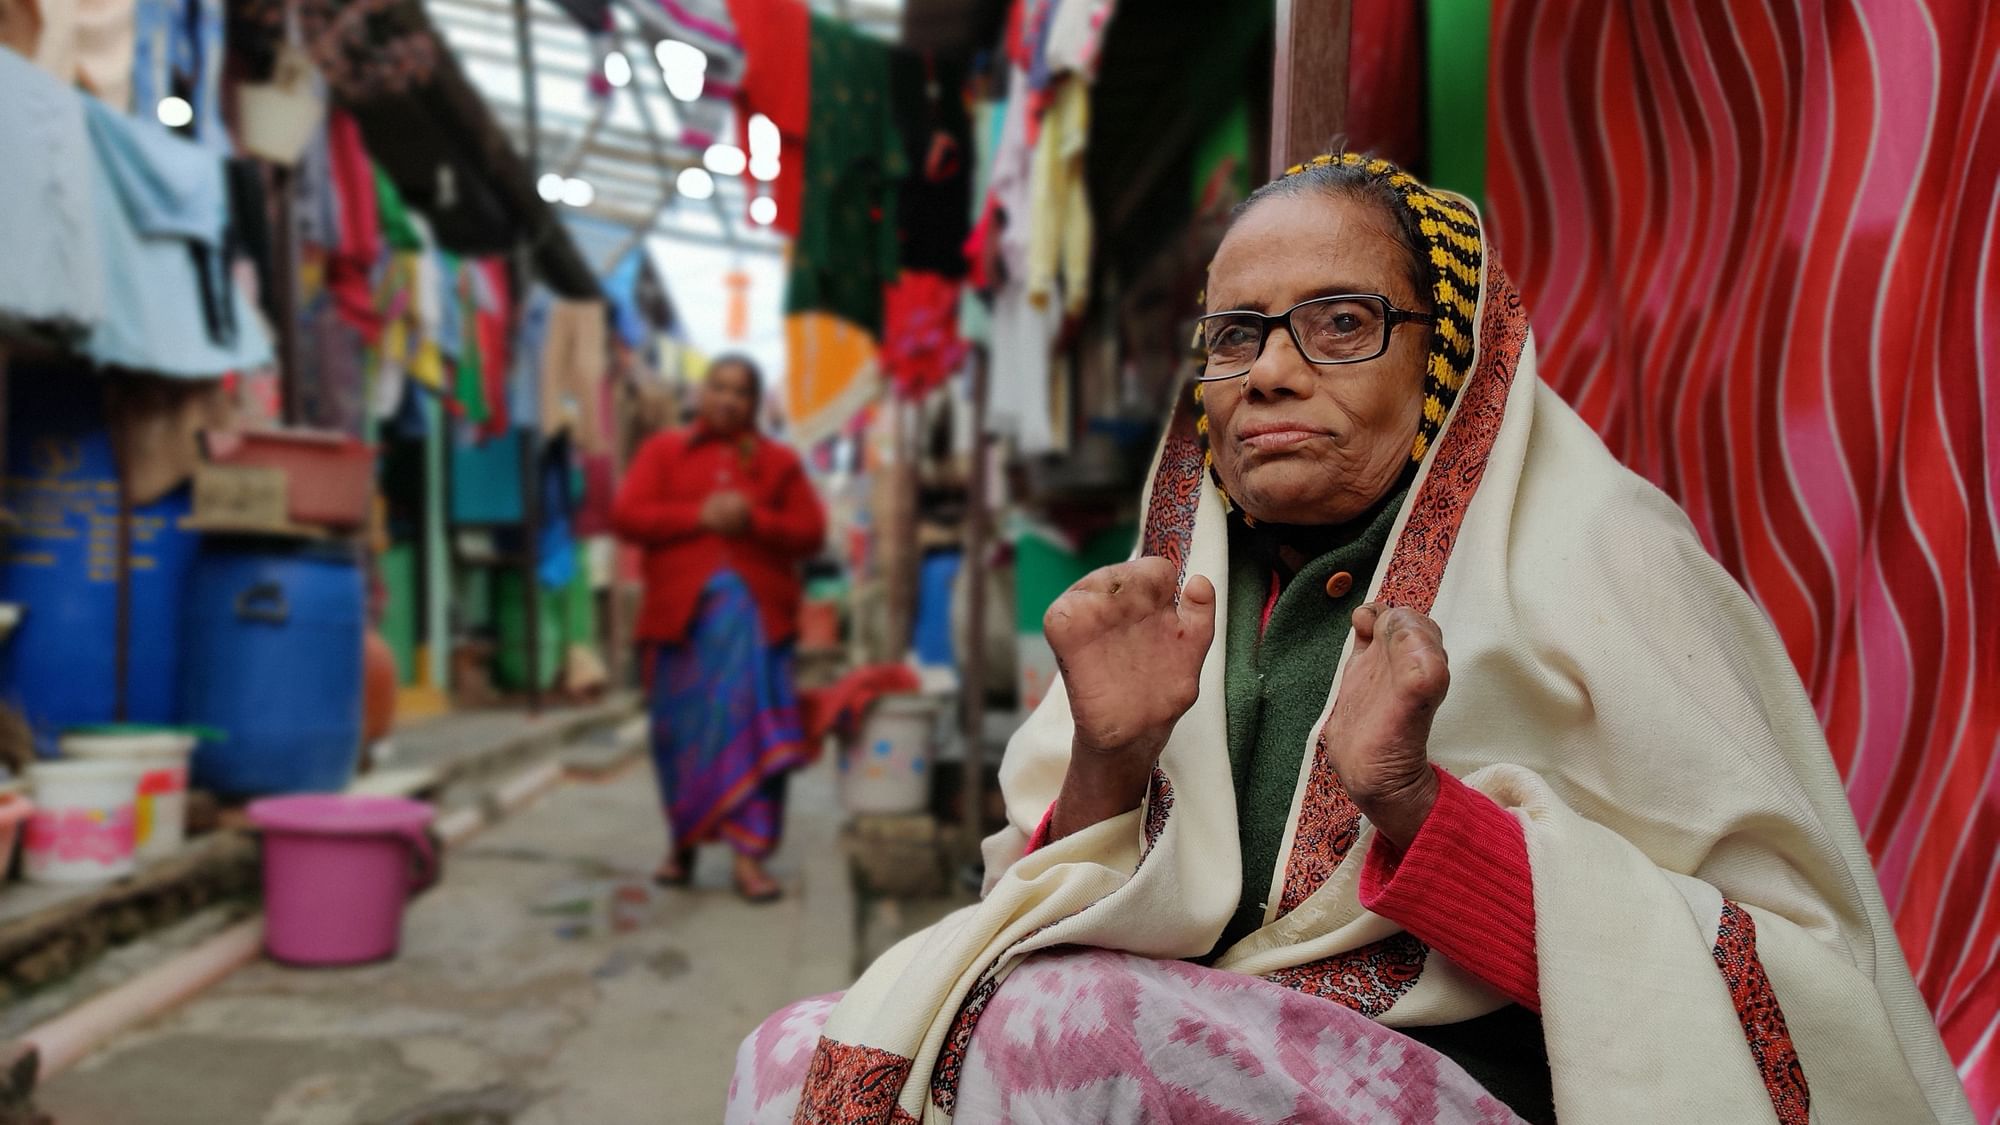 Two years after Kathputli colony was razed, its residents are yet to find a permanent home.